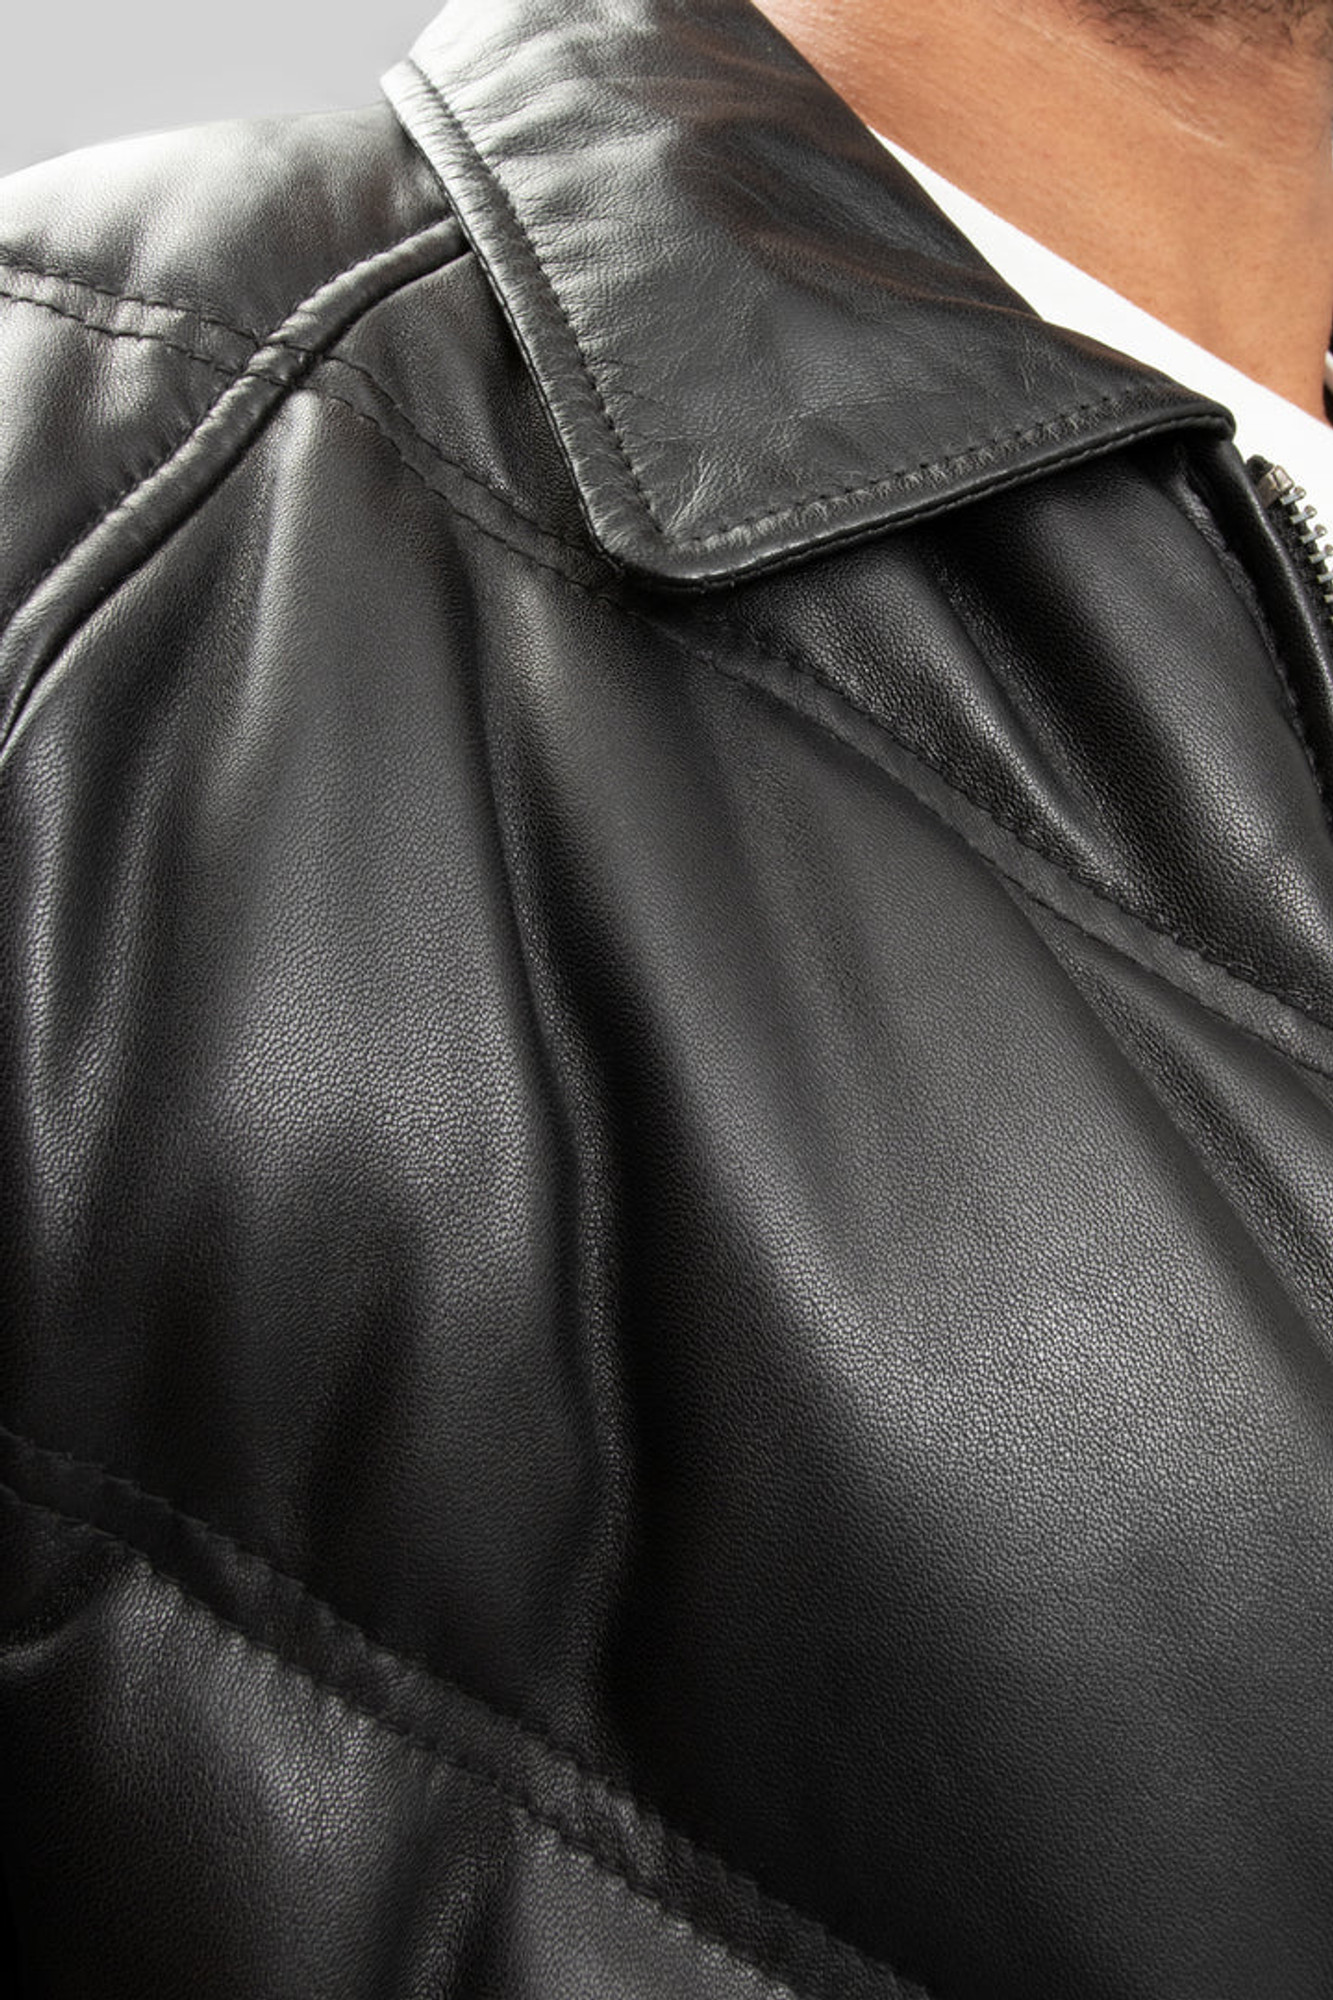 Men's Puffer Leather Jacket - Style and Warmth